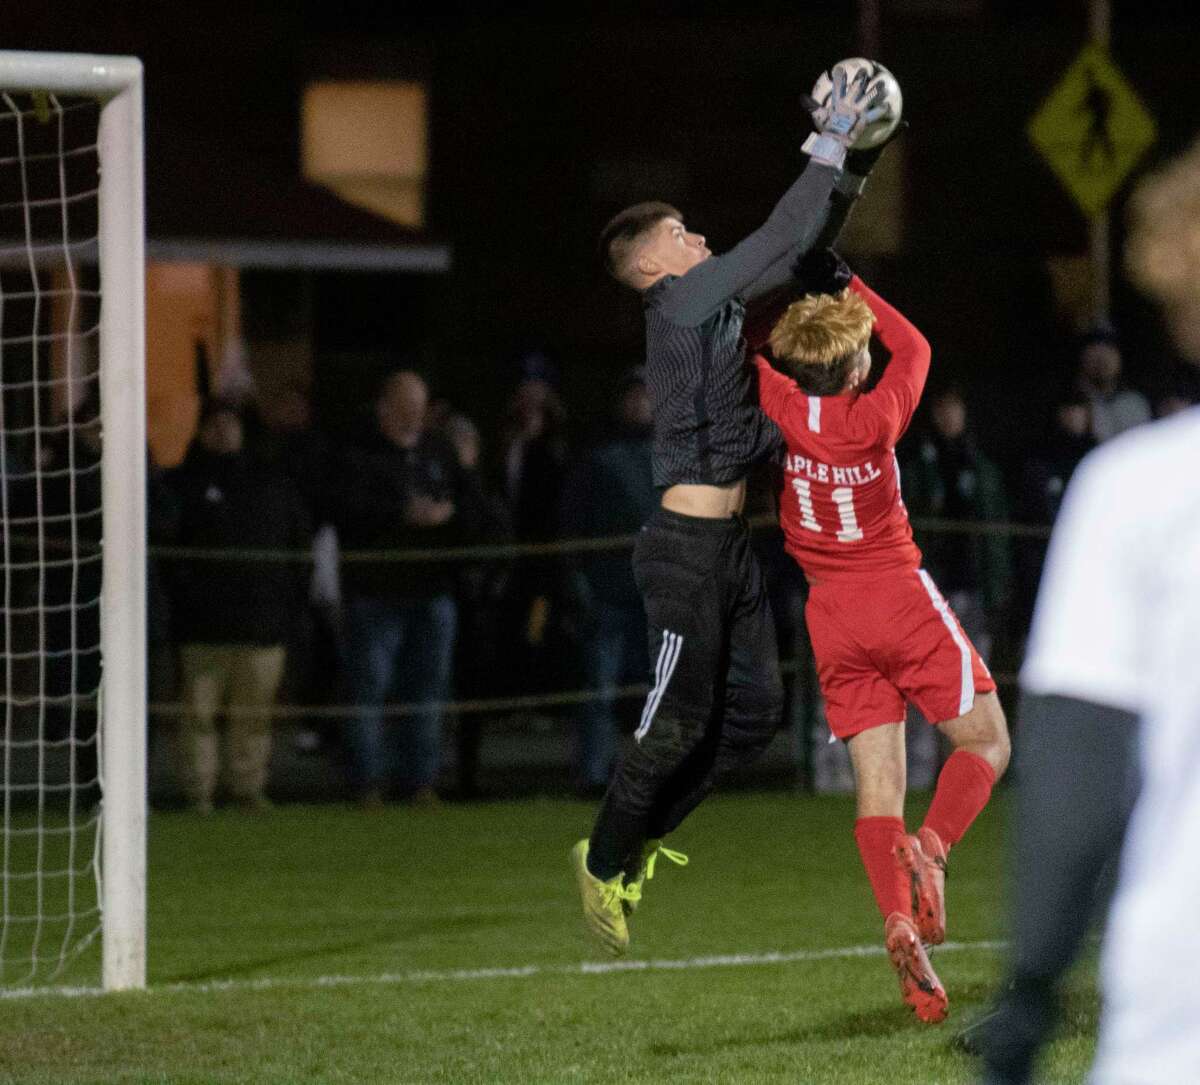 Mayfield goalie Aiden Martuscello makes a save as Maple Hill’s Hamilton Davids tries to score during the Class C boys' soccer final on Tuesday, Nov. 2, 2021 in Colonie, N.Y.